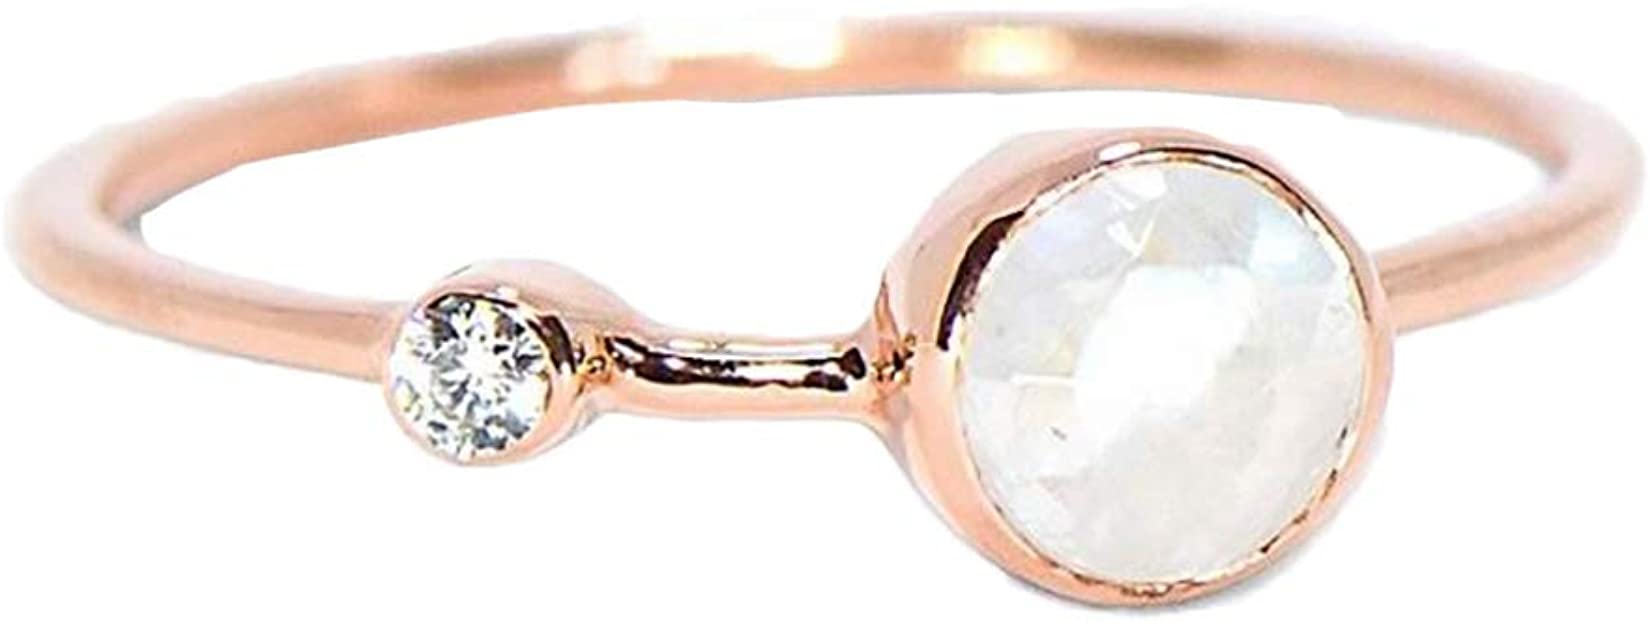 Pura Vida Rose Gold Plated Moonstone Ring - Double Stone.925 Sterling Silver - Sizes 5-9